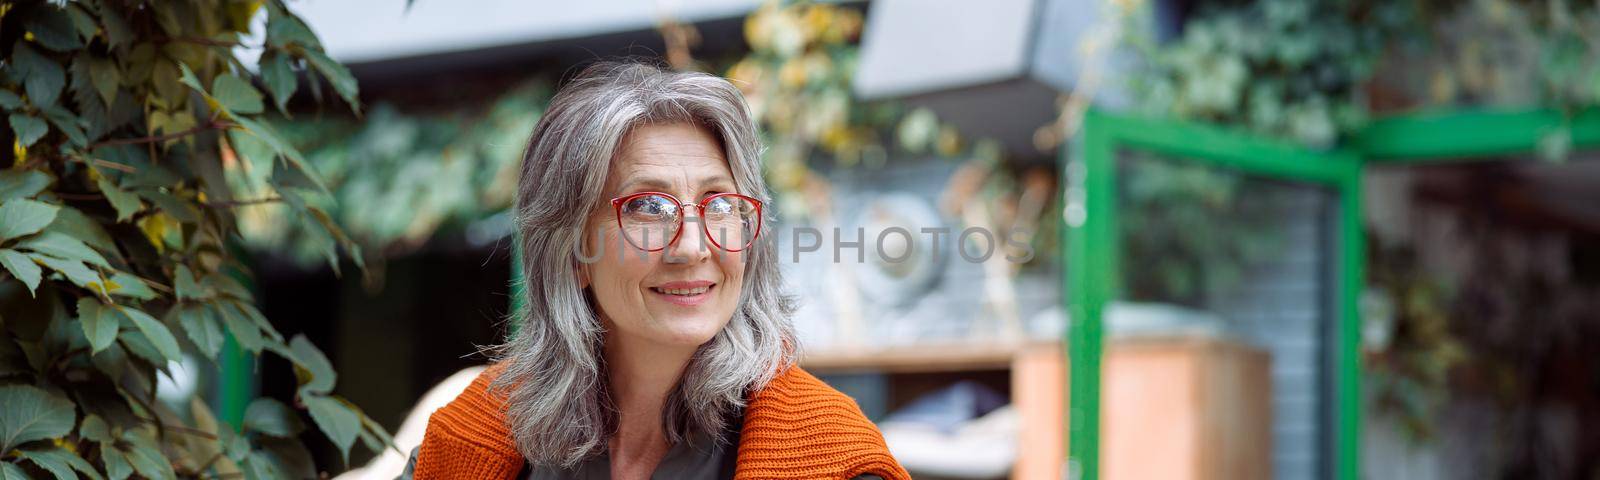 Happy mature woman with glasses eats dessert sitting at small table outdoors by Yaroslav_astakhov